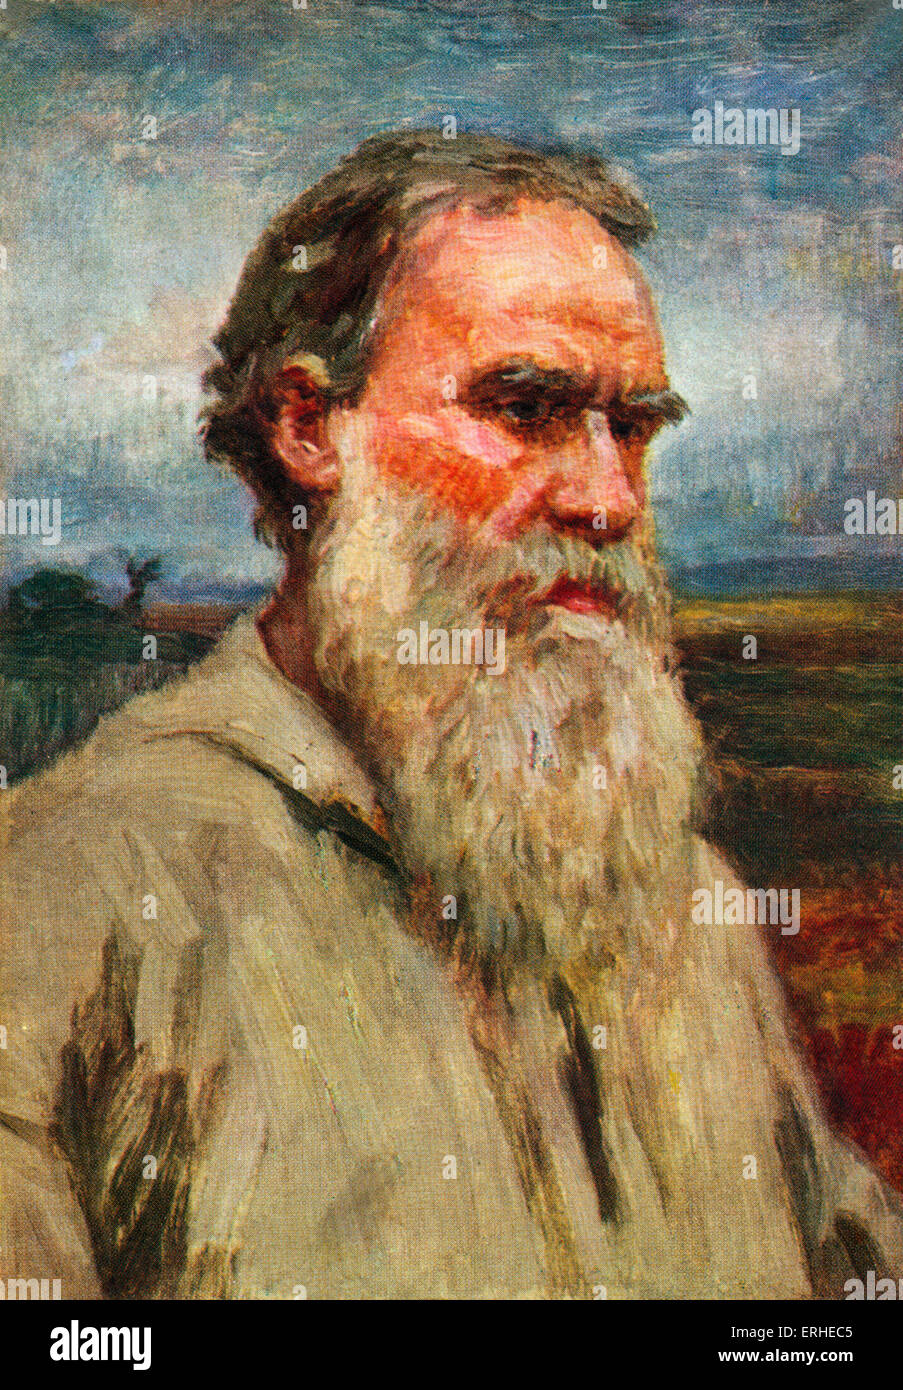 Leo Tolstoy - portrait of the Russian writer, aesthetic philosopher, moralist and mystic 1828-1910 Stock Photo